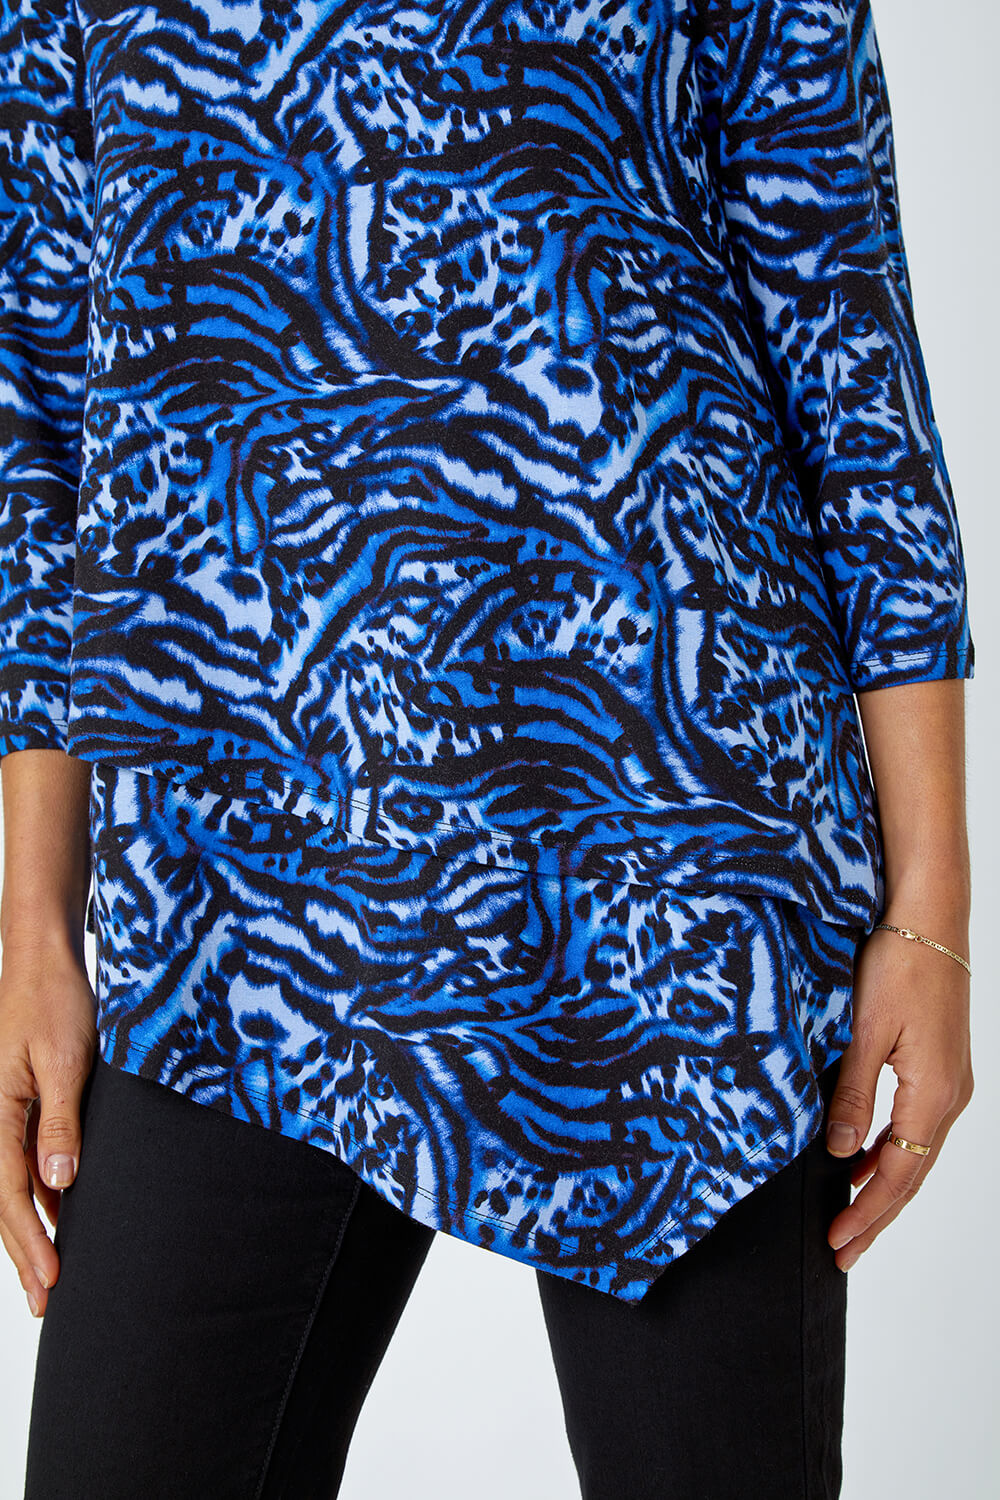 Blue Animal Asymmetric Layer Stretch Top, Image 5 of 5